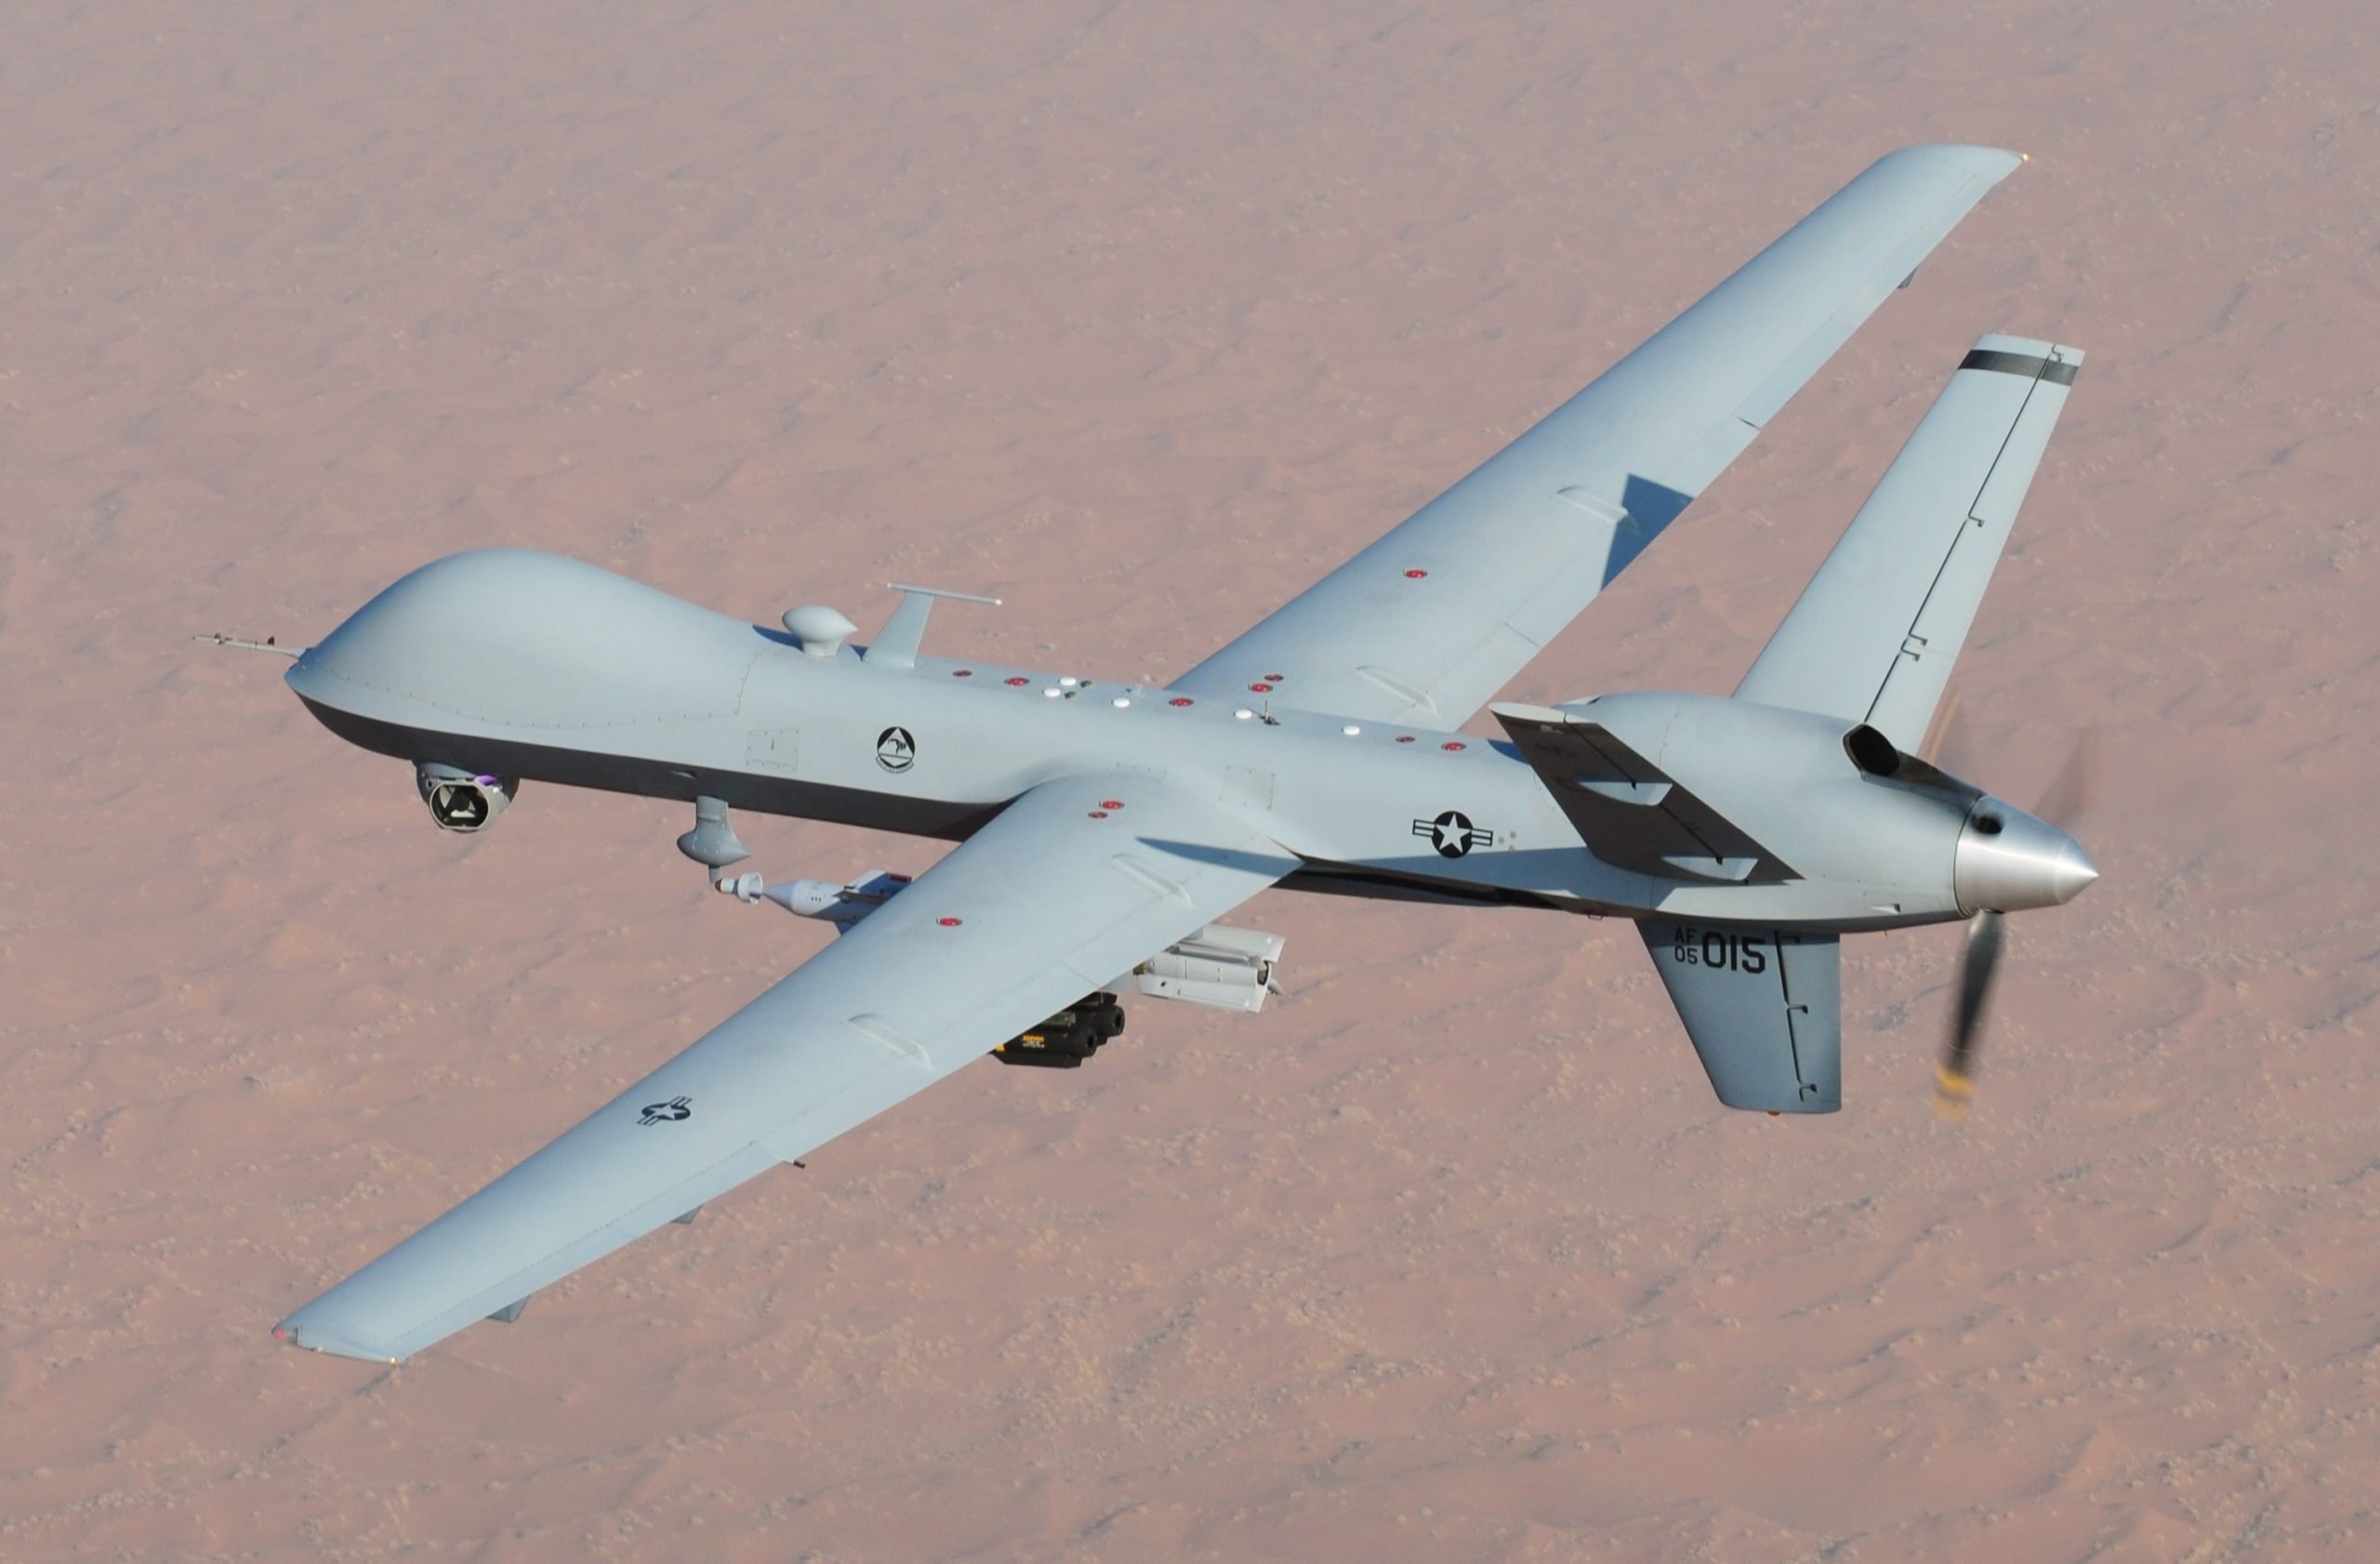 The US approves the sale of four MQ-9 drones to Taiwan.